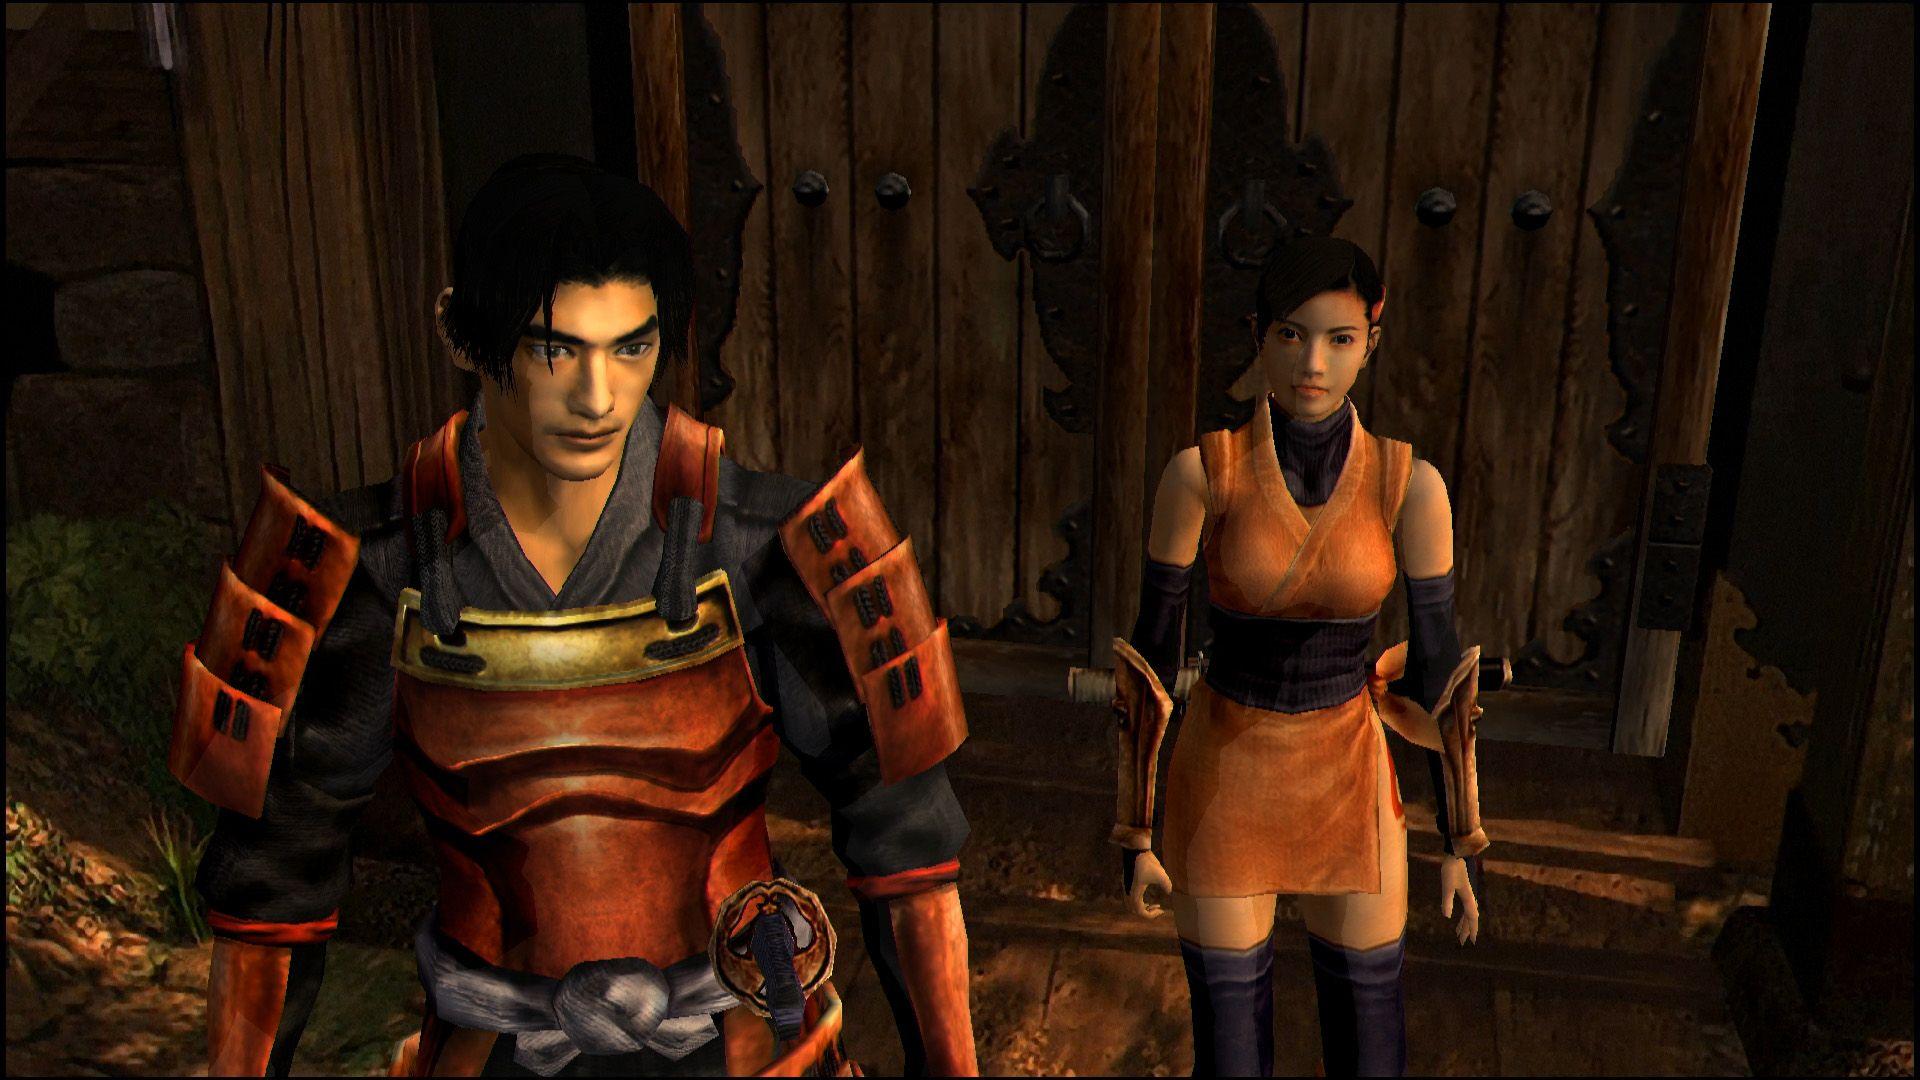 Onimusha: Warlords is coming back in 2019